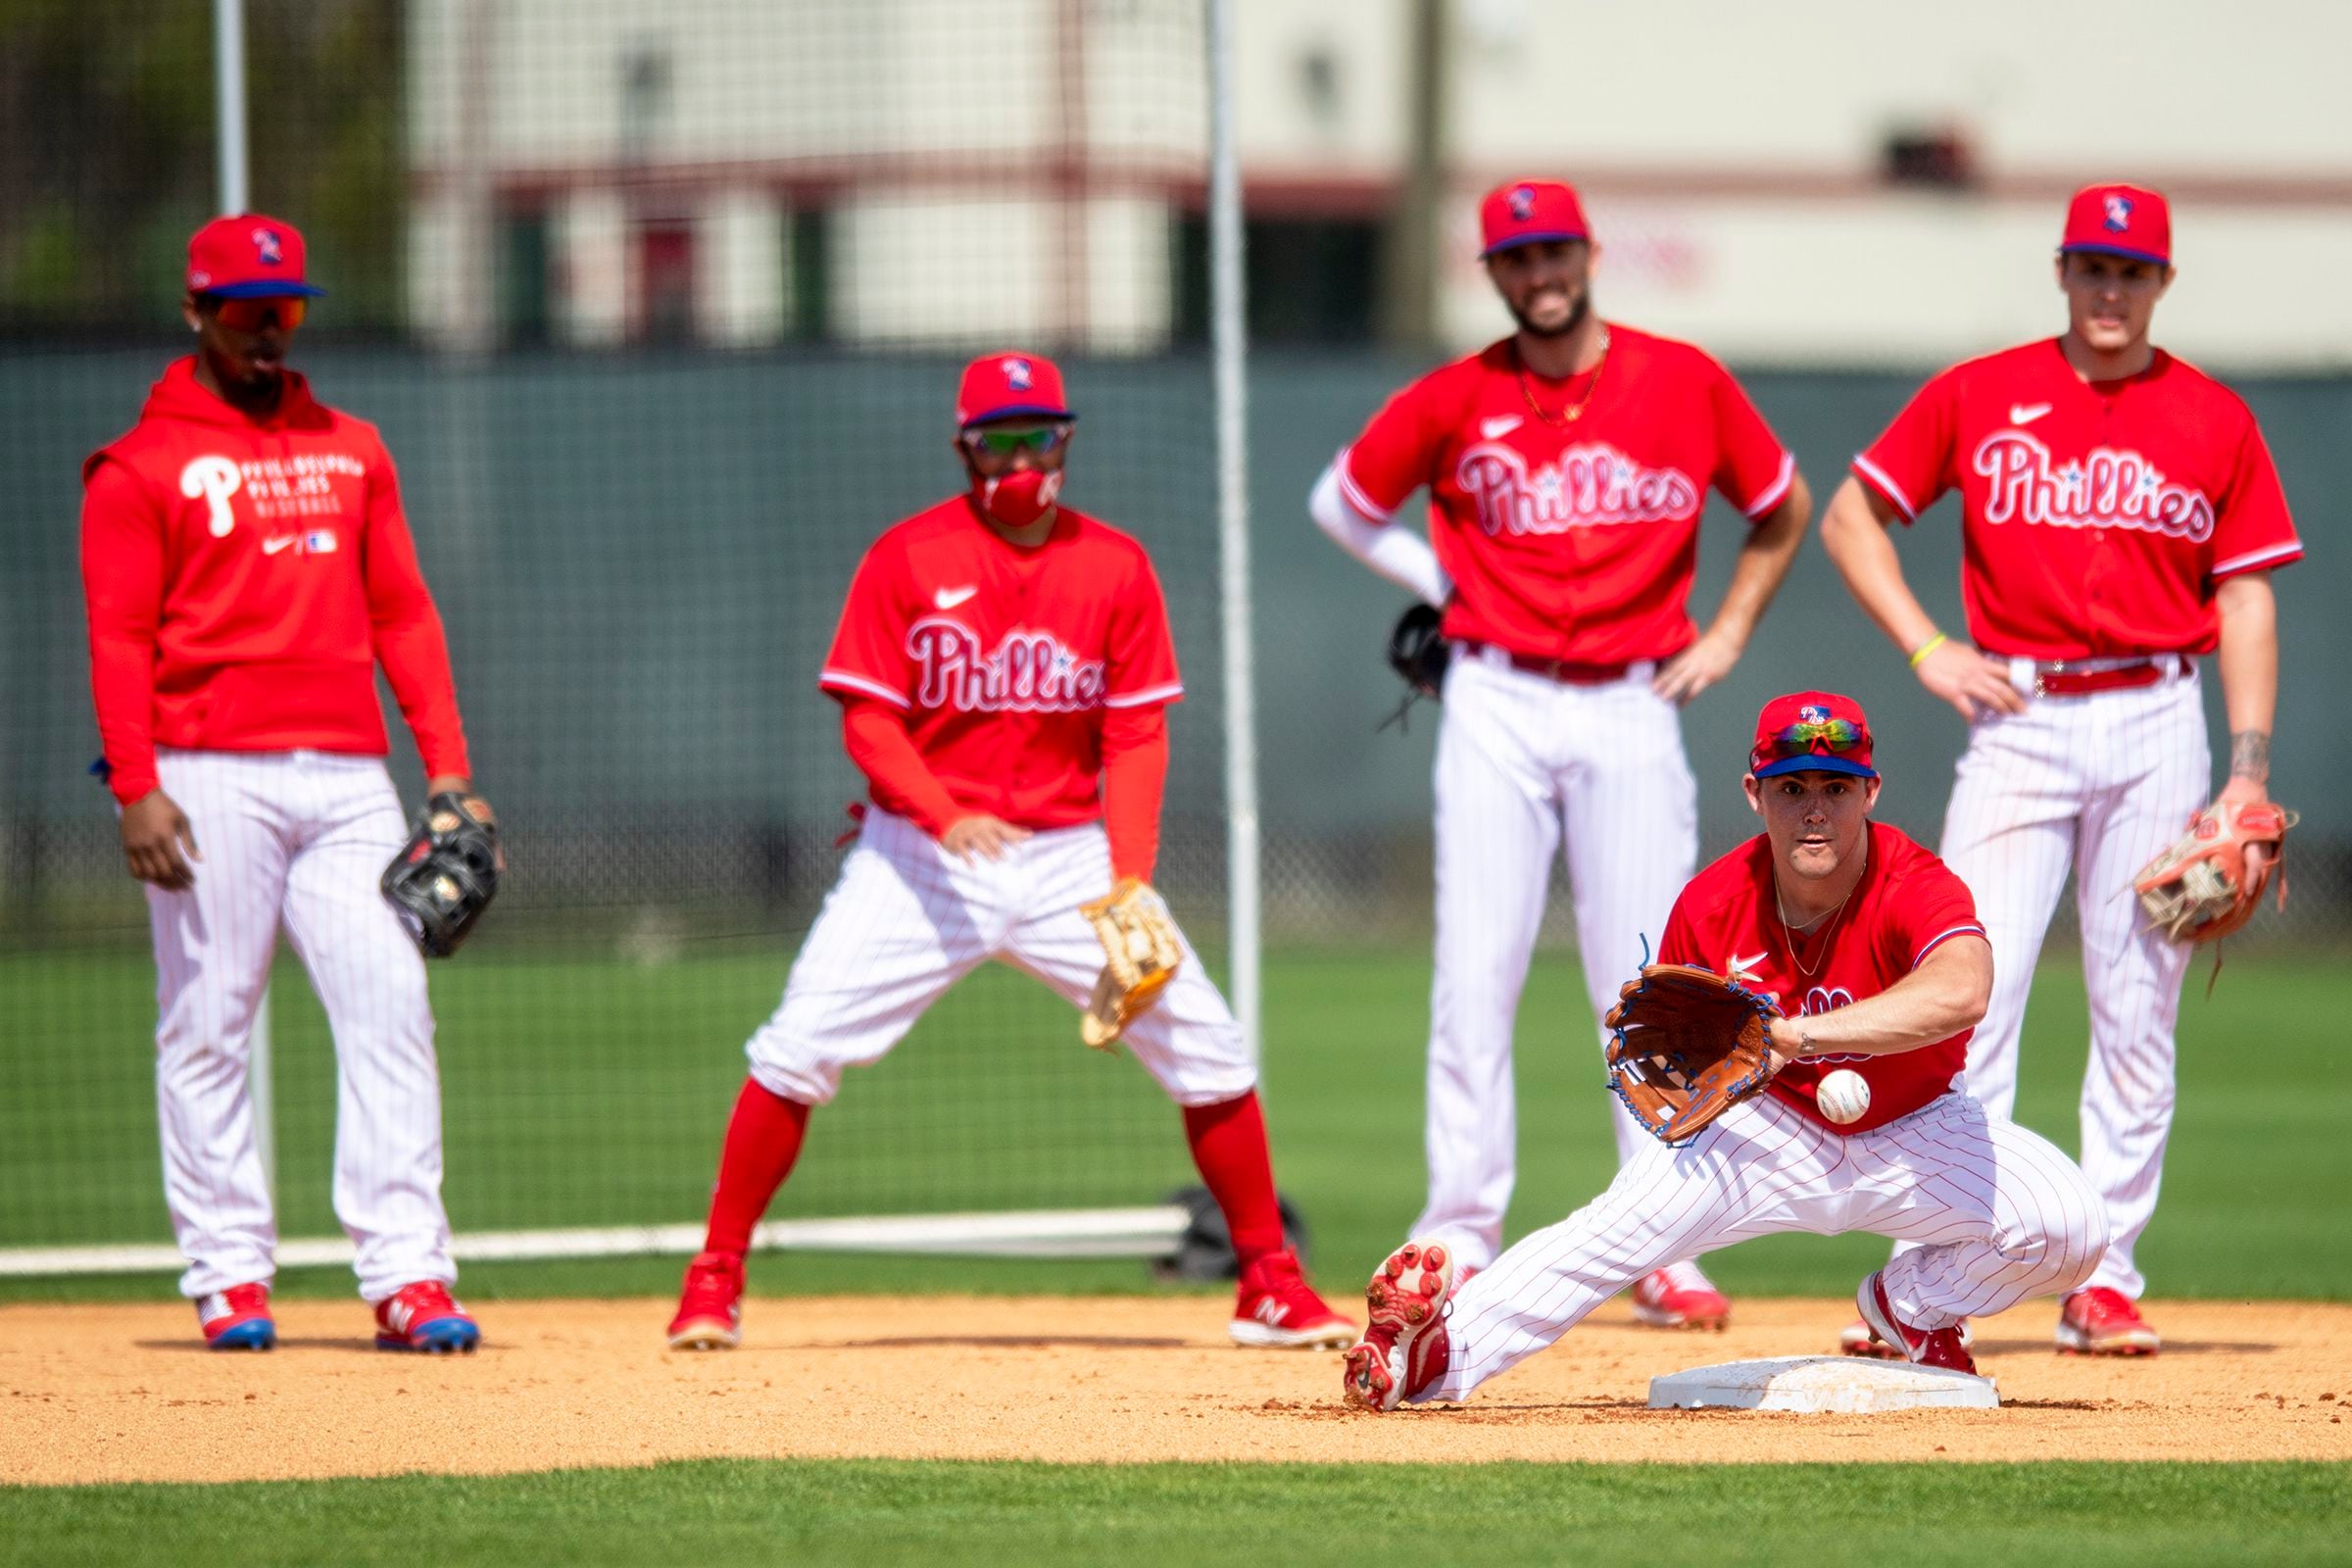 Phillies spring training home gets new name – The Morning Call